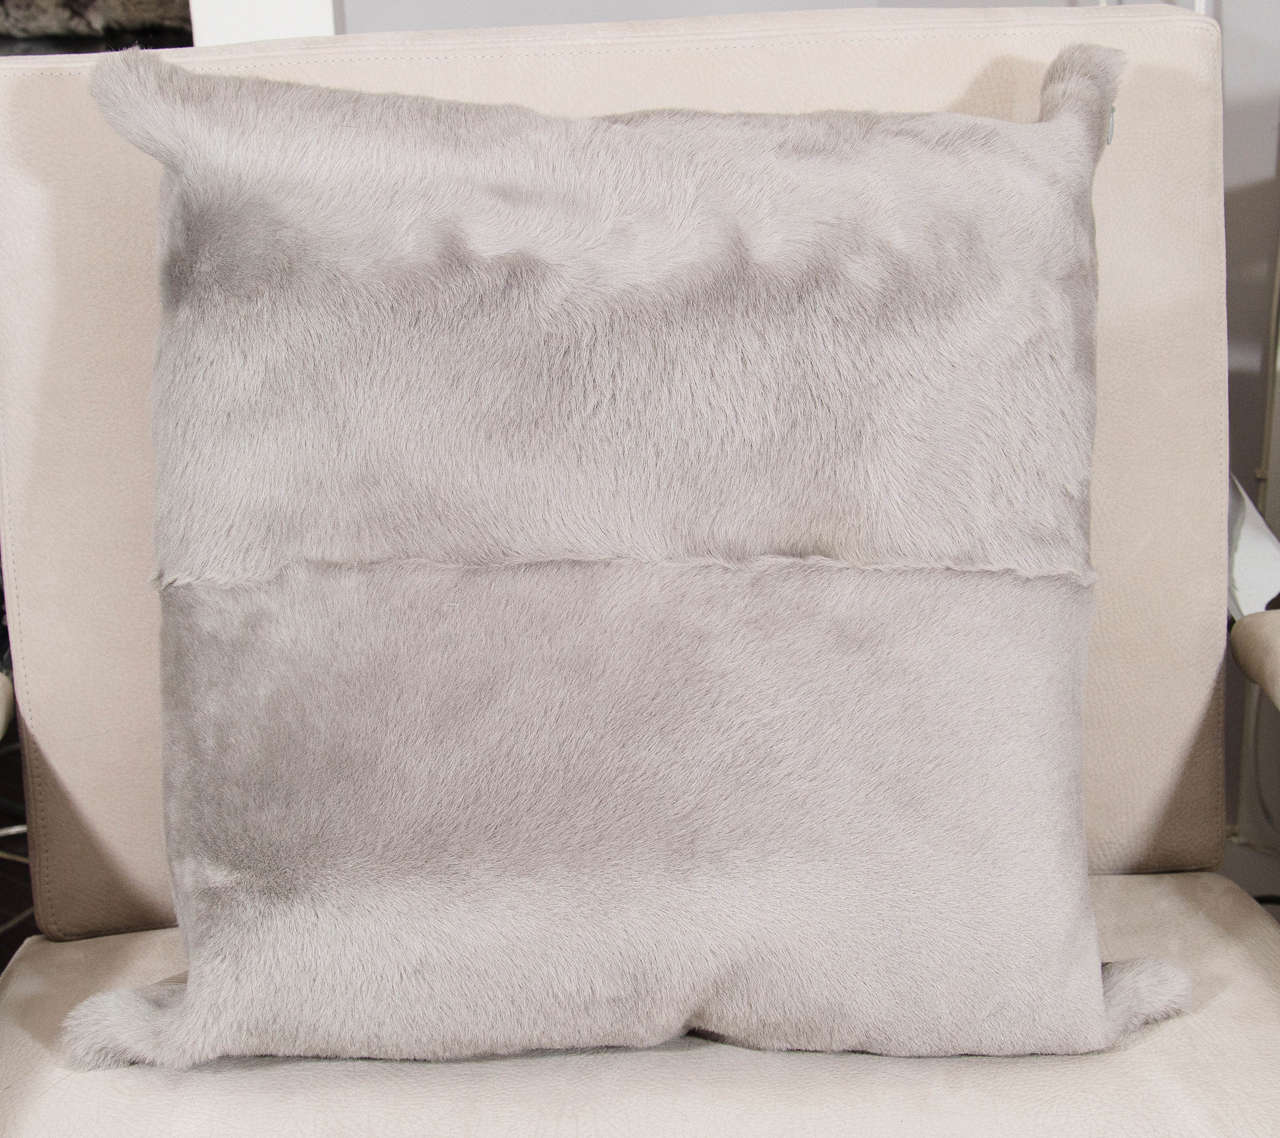 Grey sheared goat pillow with leather backing.